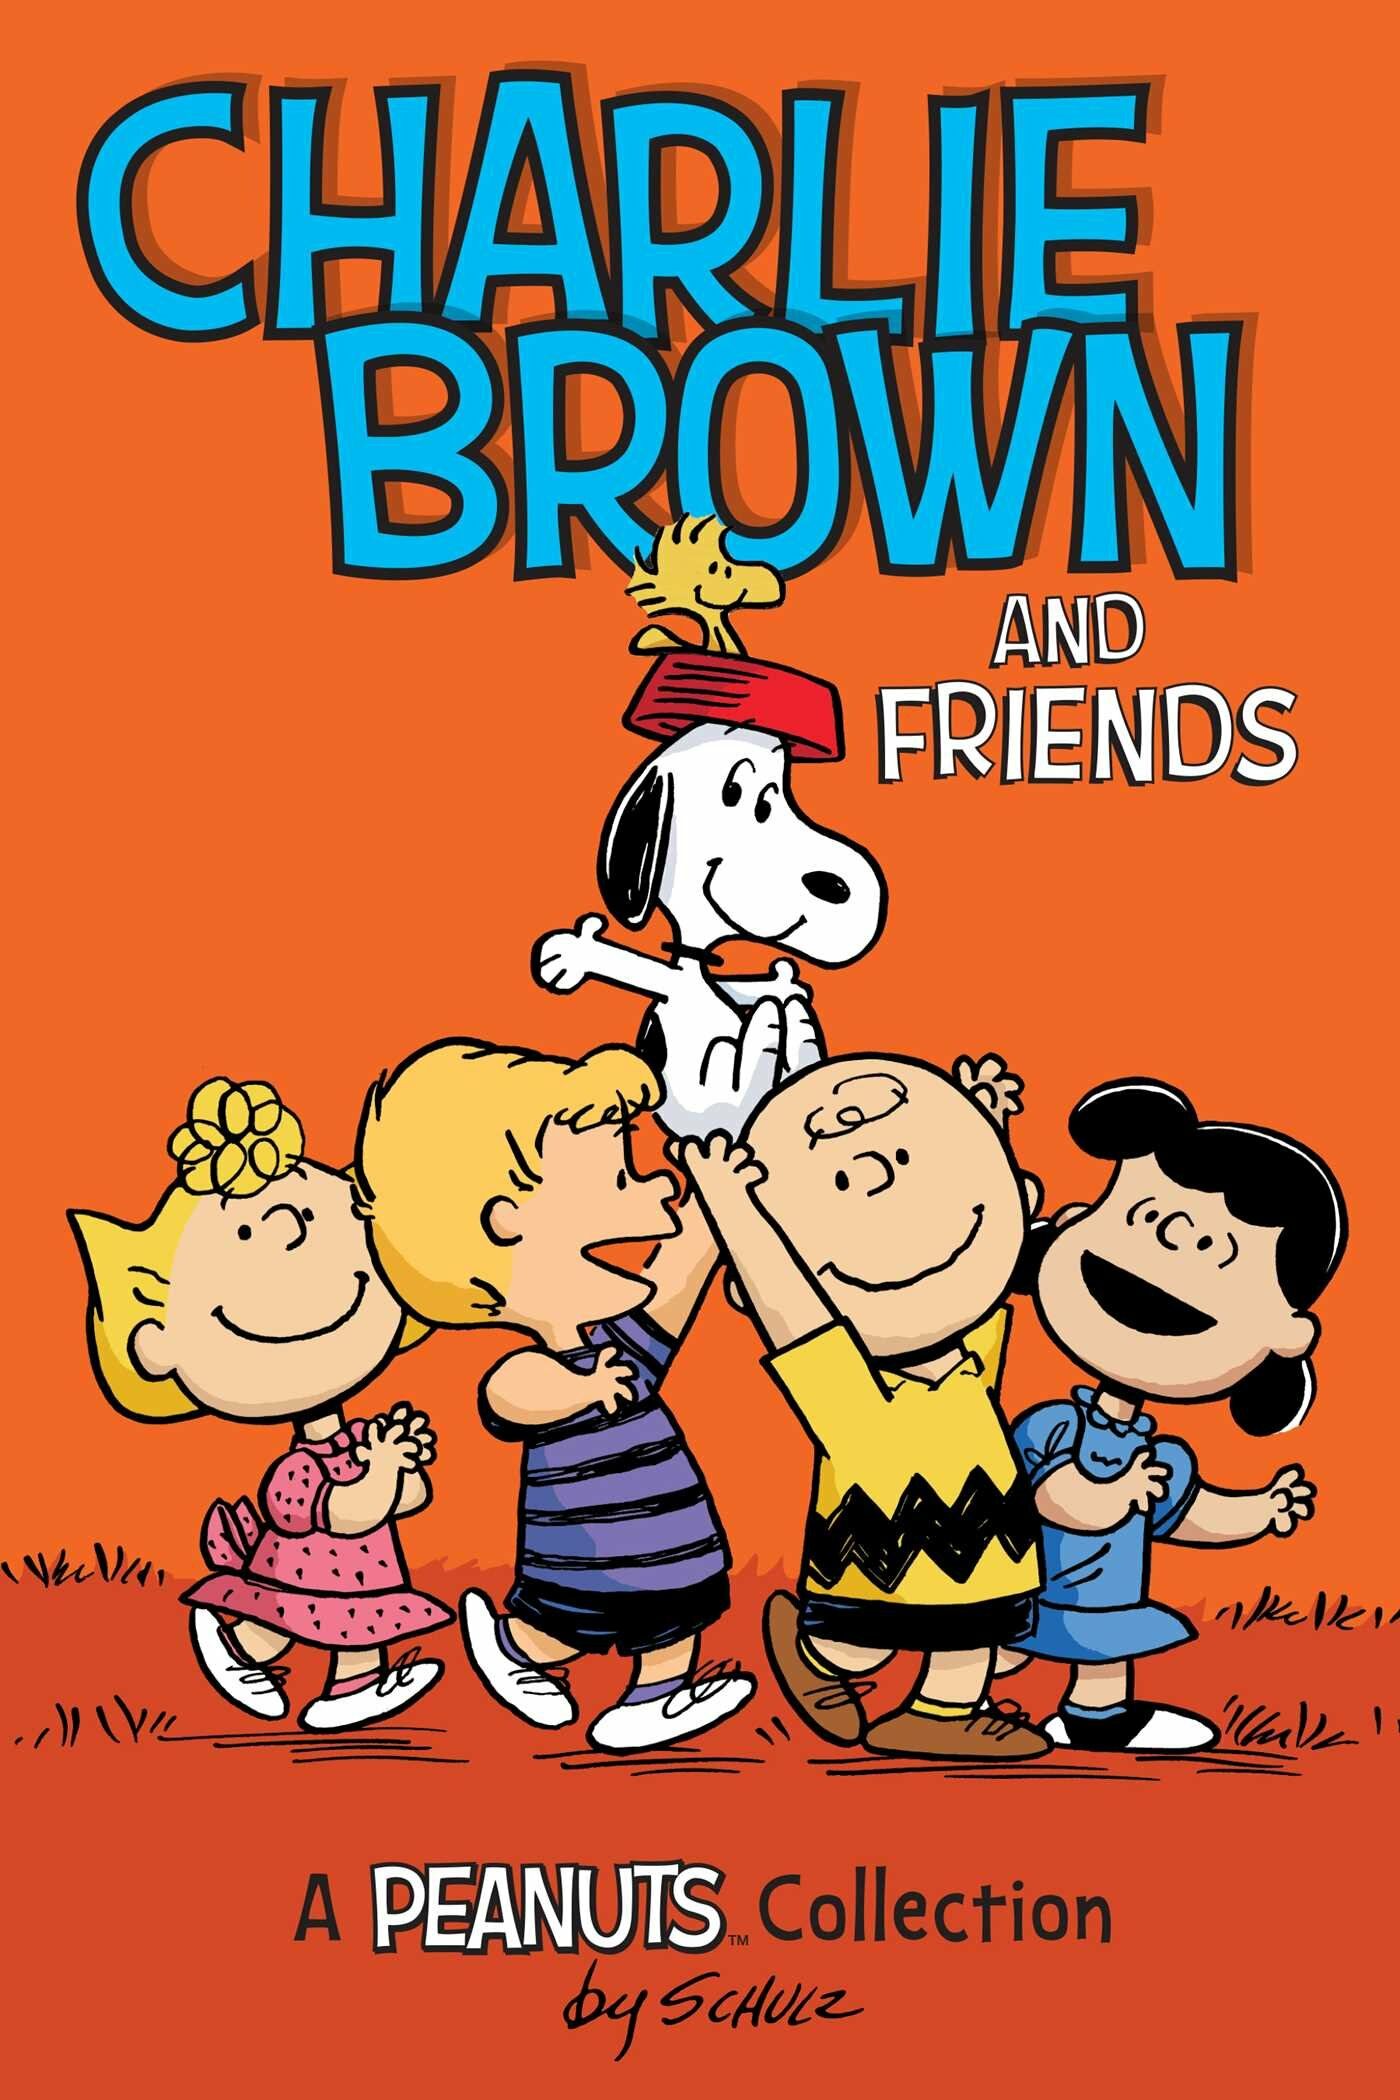 A Peanuts Collection #2 : Charlie Brown and Friends (Paperback)